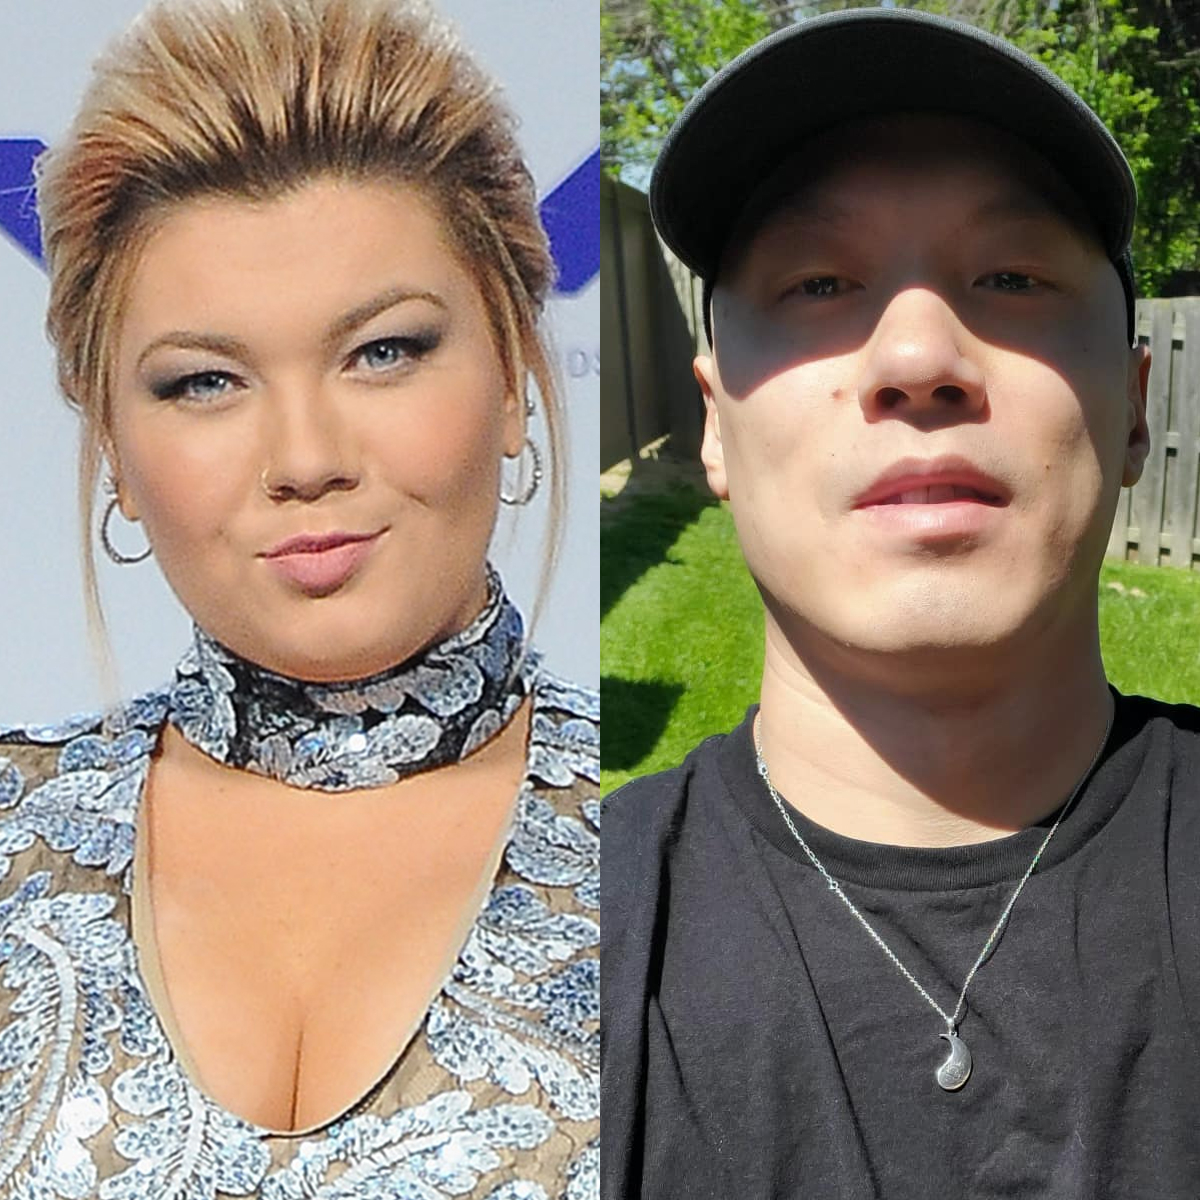 Teen Mom Star Amber Portwood’s Fiancé Reported Missing